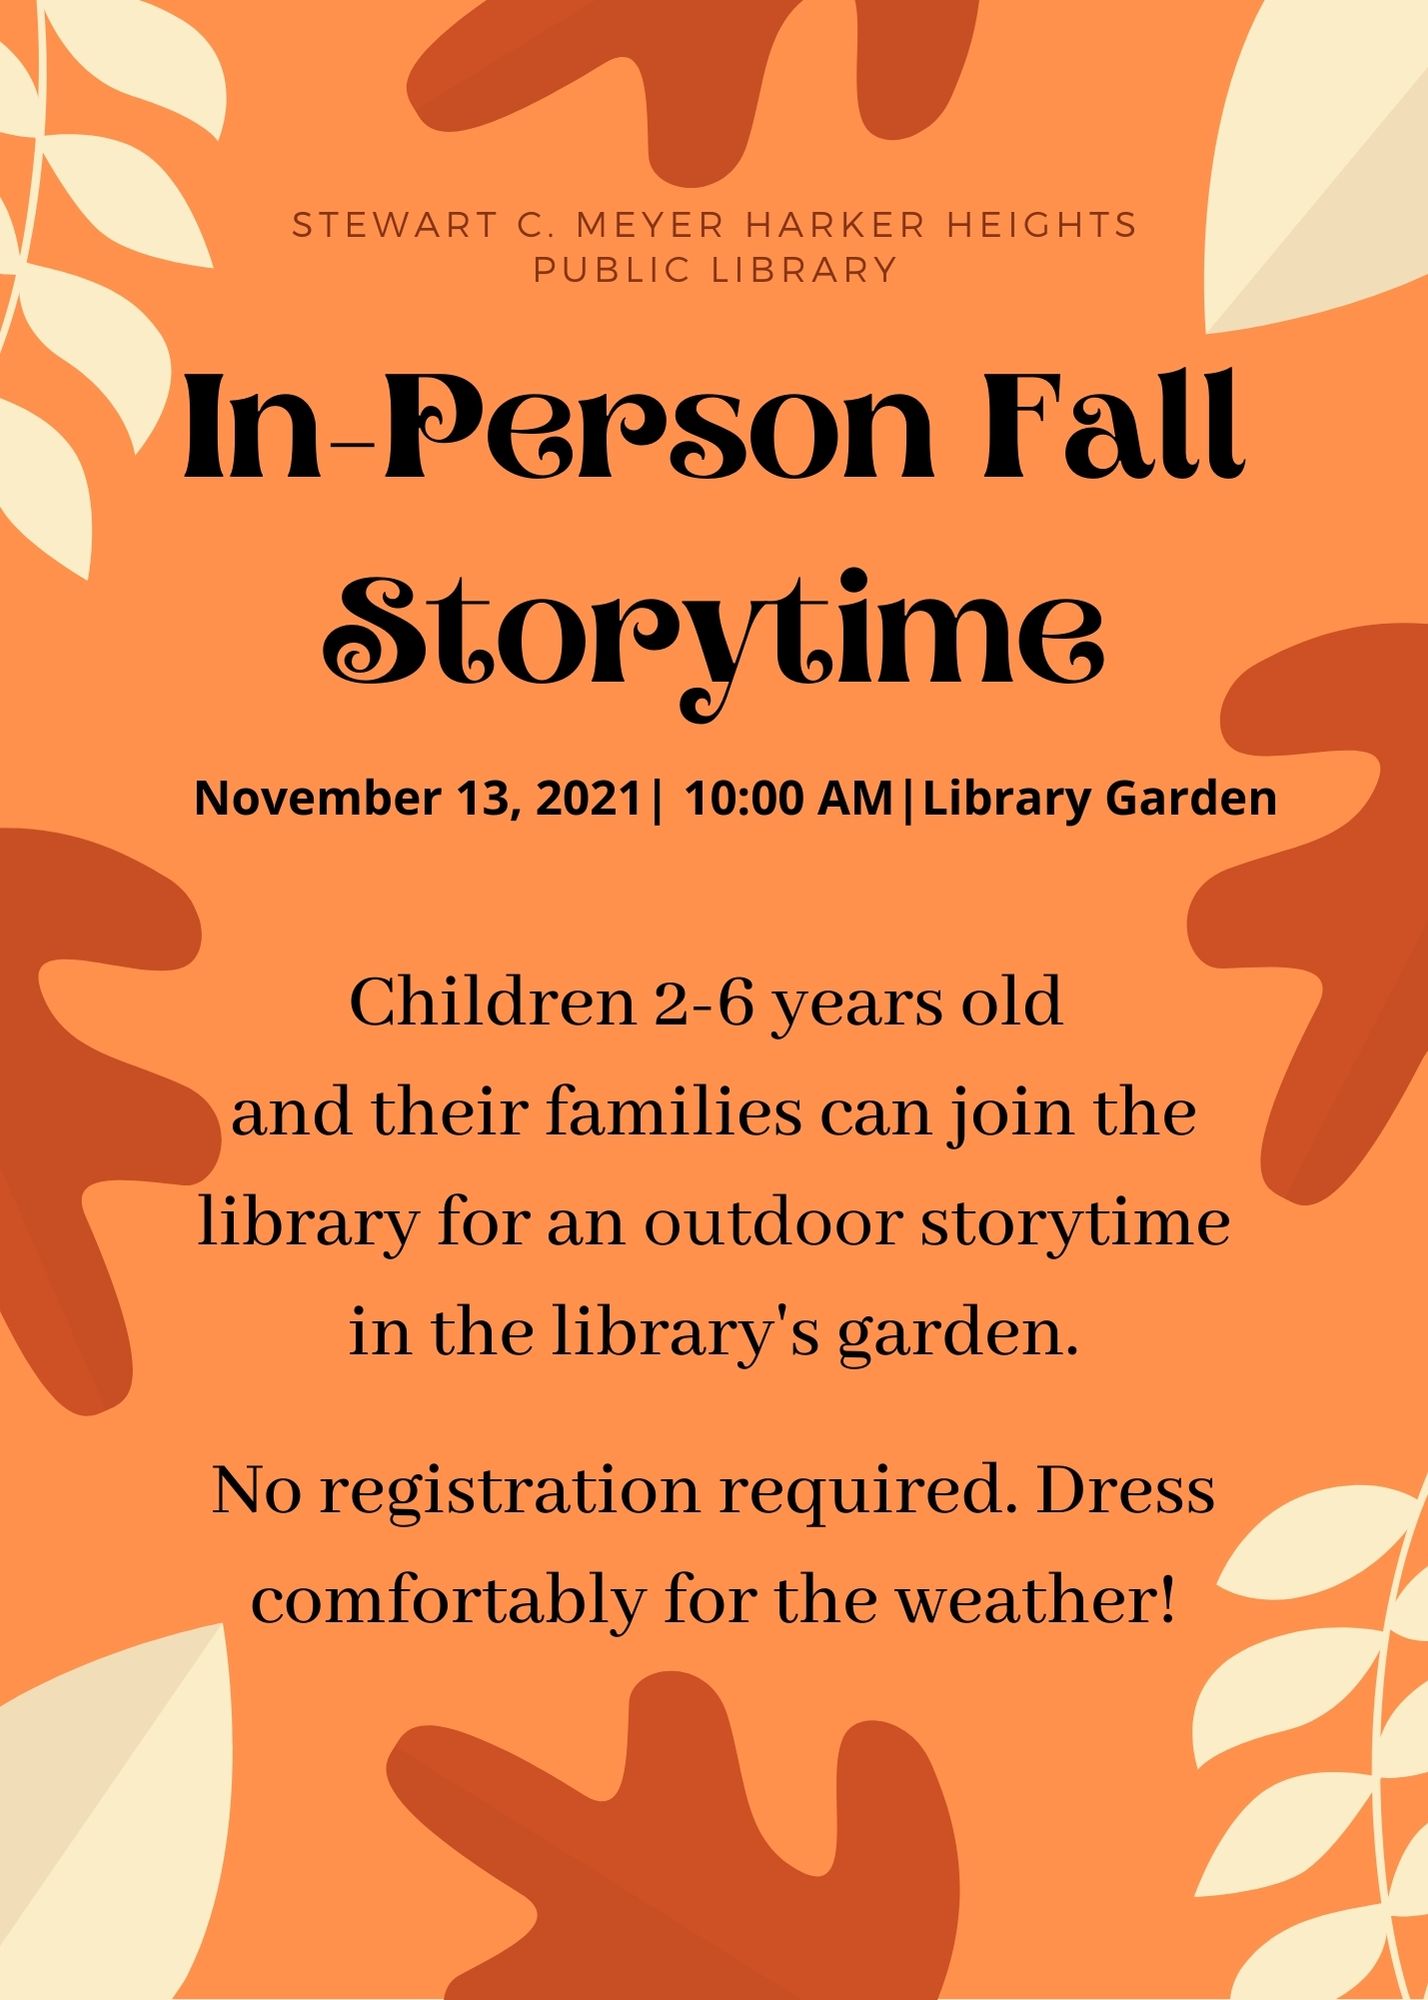 Nov. 2021 IN-PERSON Fall Storytime 